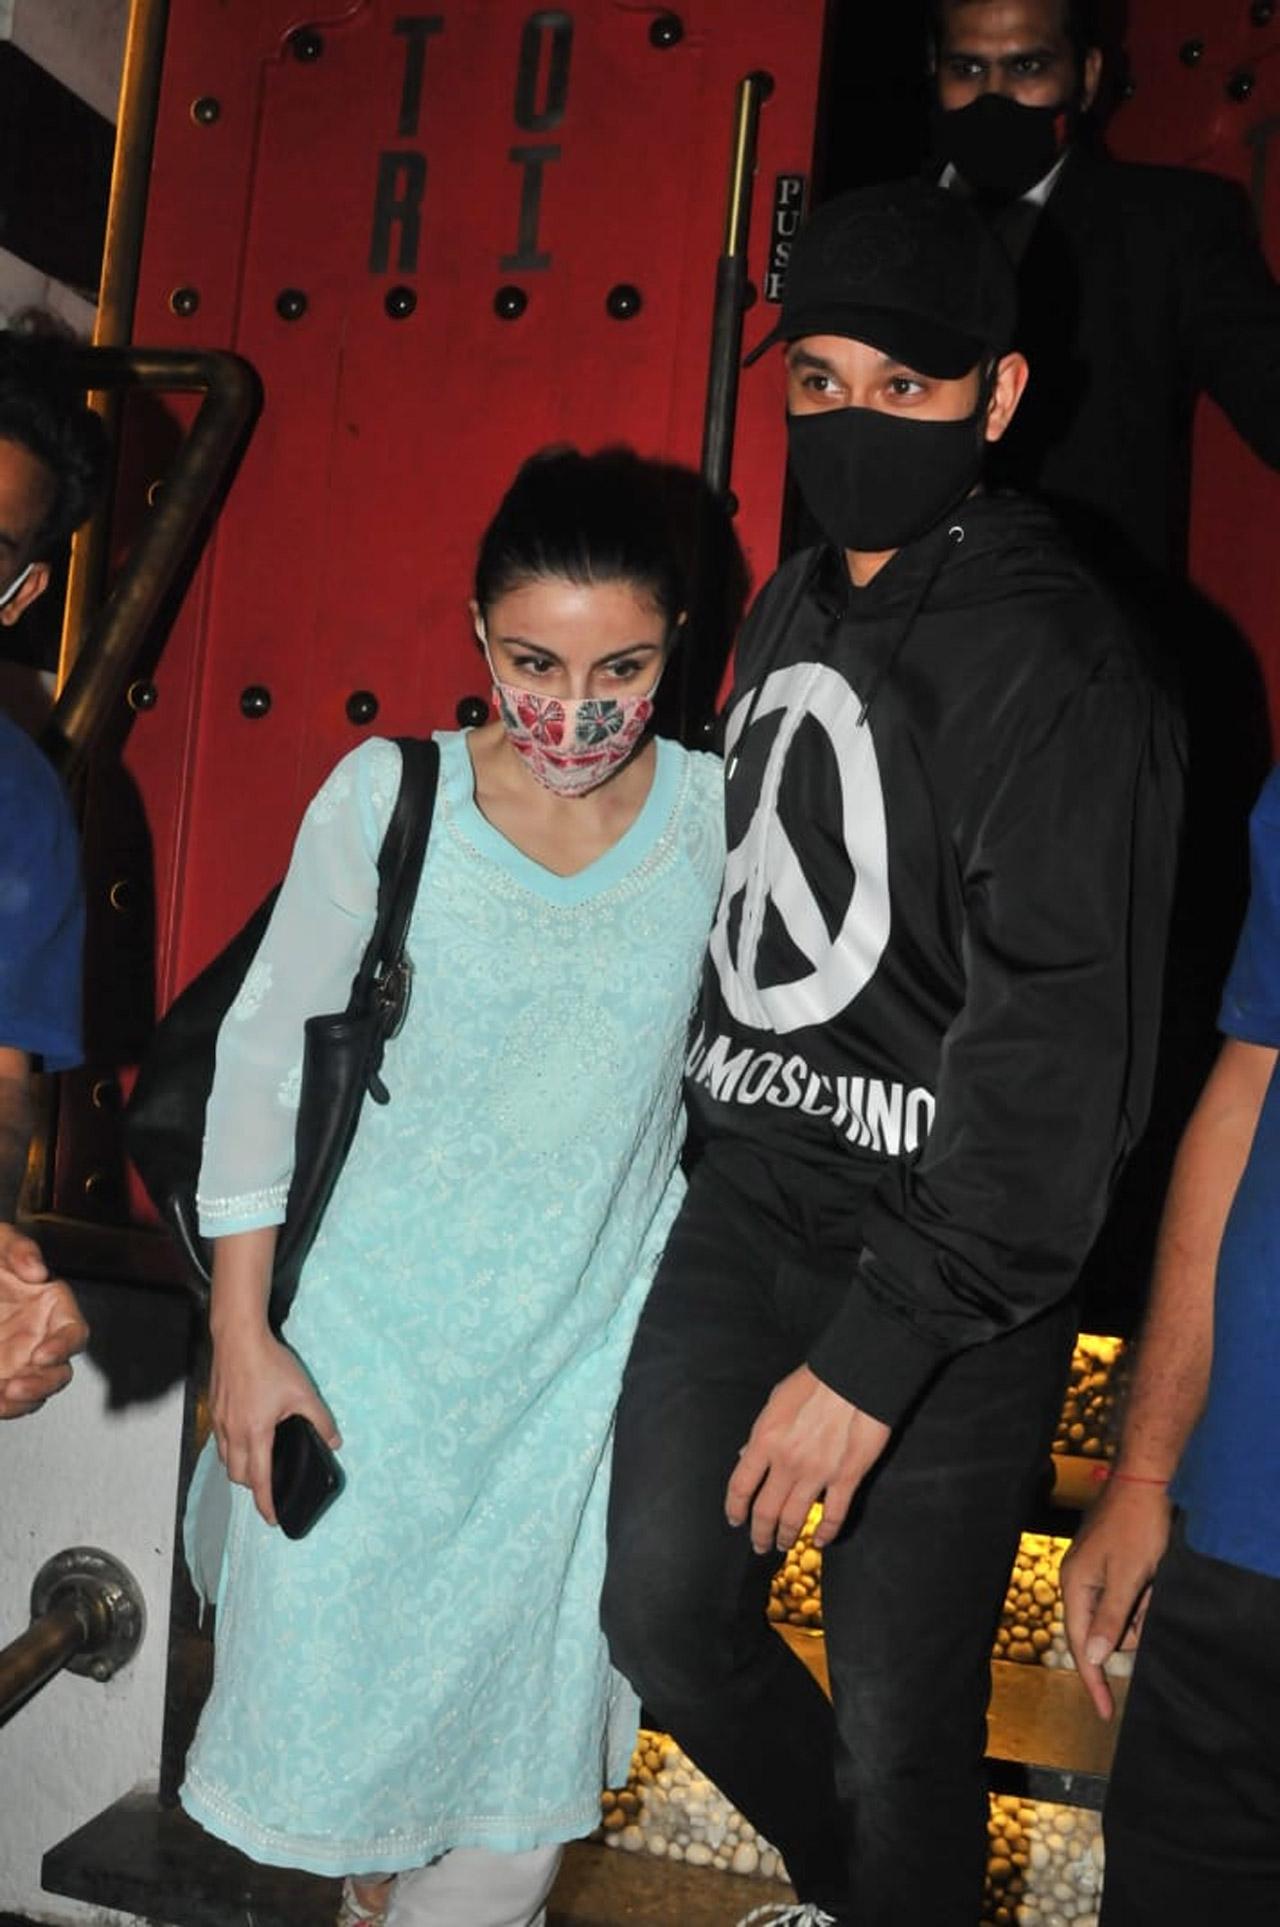 Soha Ali Khan and husband-actor, Kunal Kemmu stepped out to dine at a popular restaurant in Bandra, Mumbai. The couple did not seem to be pleased to see paparazzi at the venue.